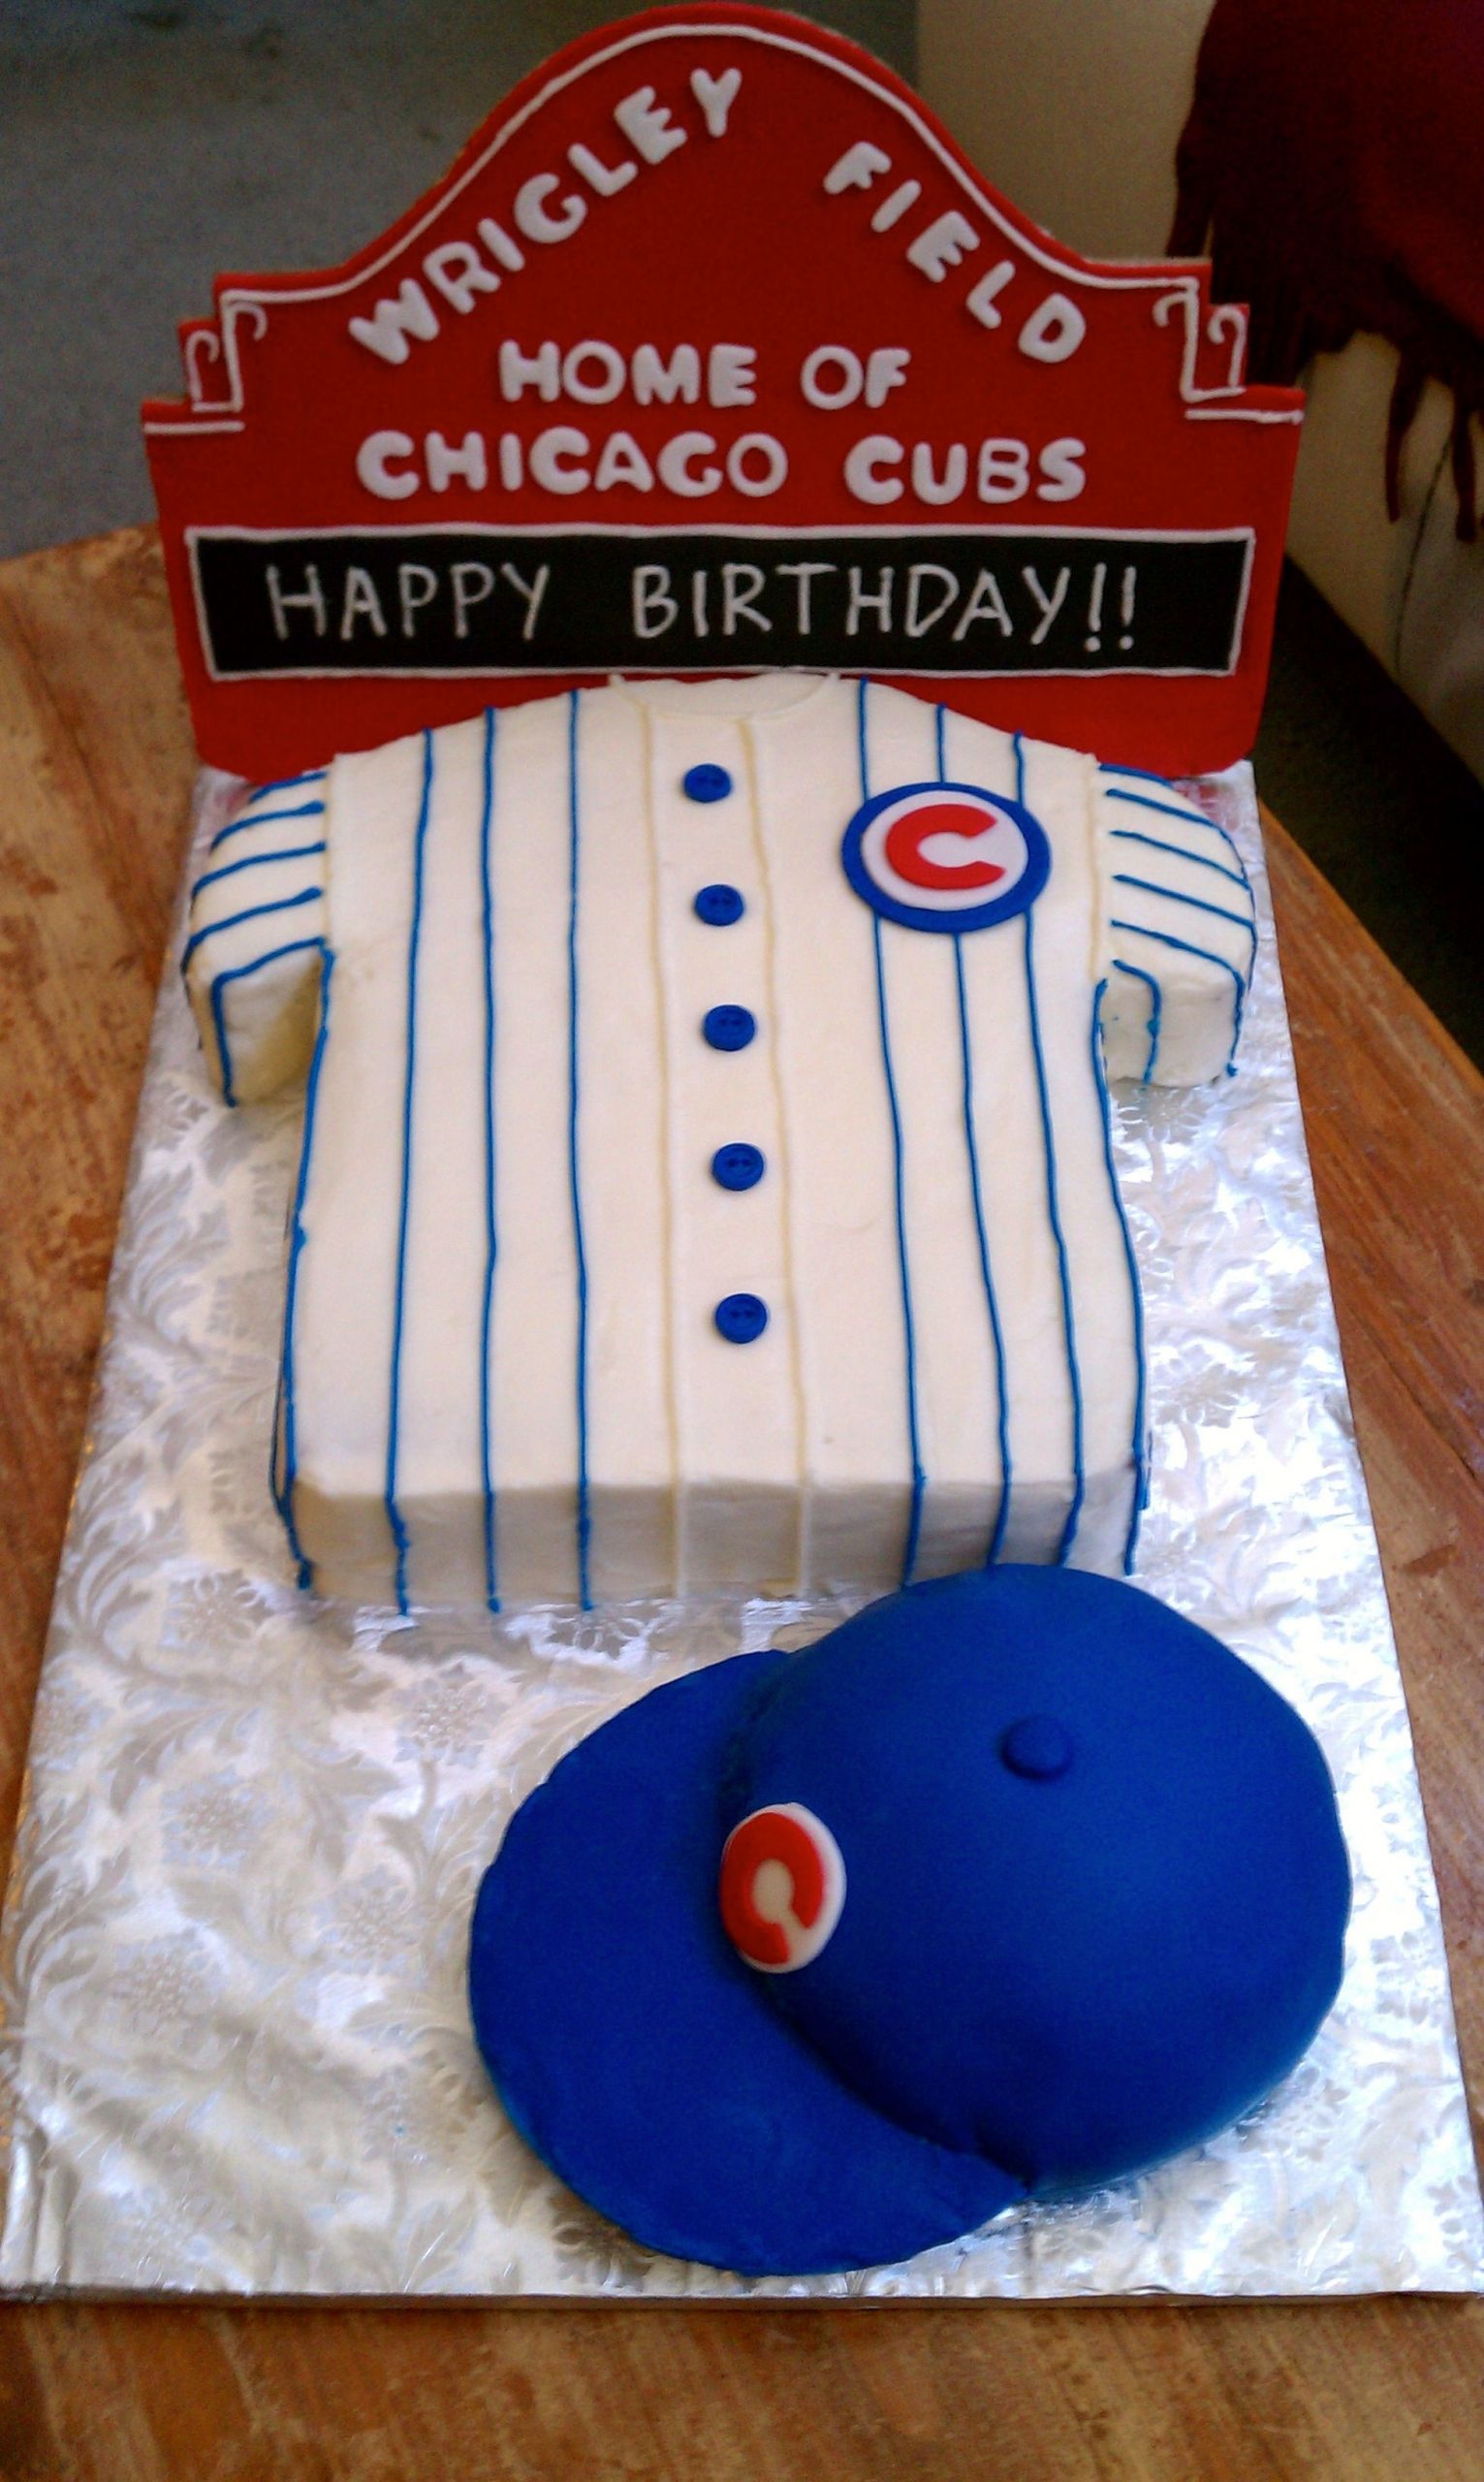 40Th Birthday Party Ideas Chicago
 Chicago Cubs Wrigley Field Birthday Cake with Cubs